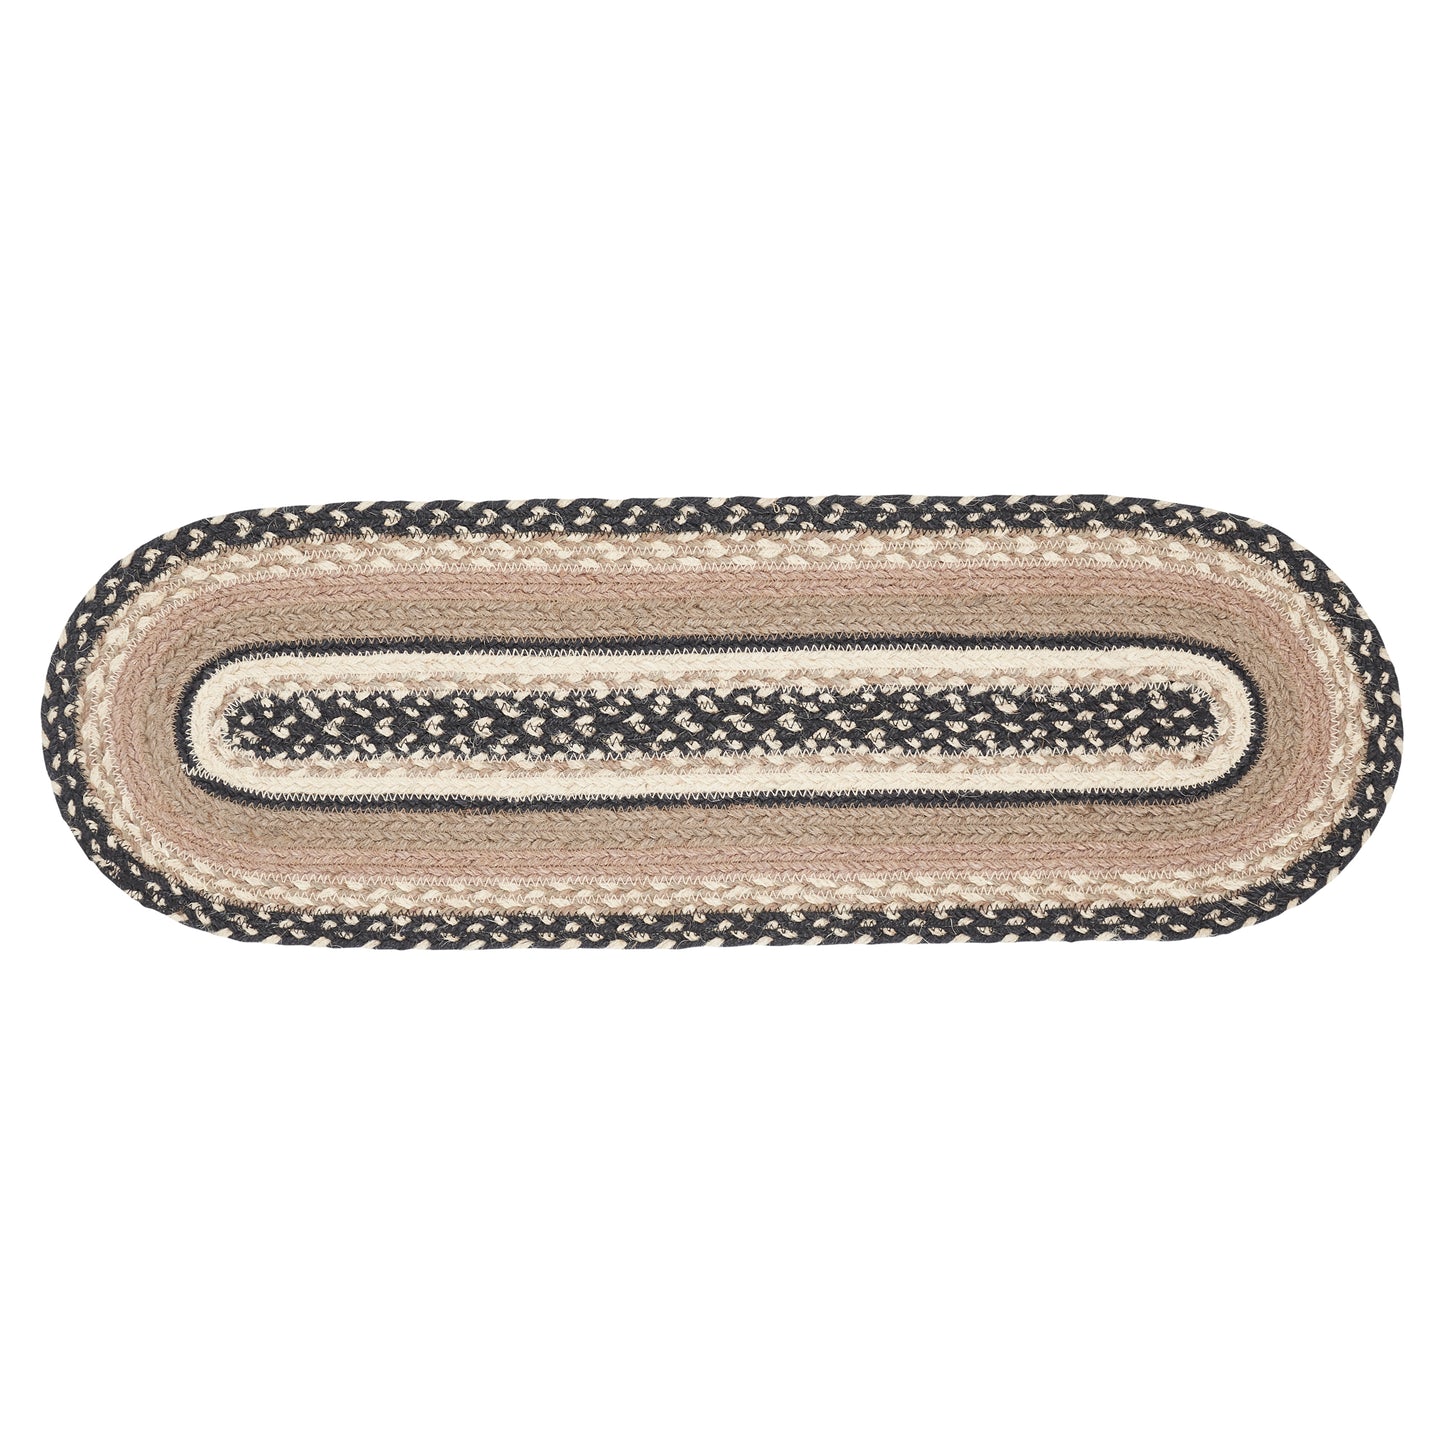 81454-Sawyer-Mill-Charcoal-Creme-Jute-Stair-Tread-Oval-Latex-8.5x27-image-6